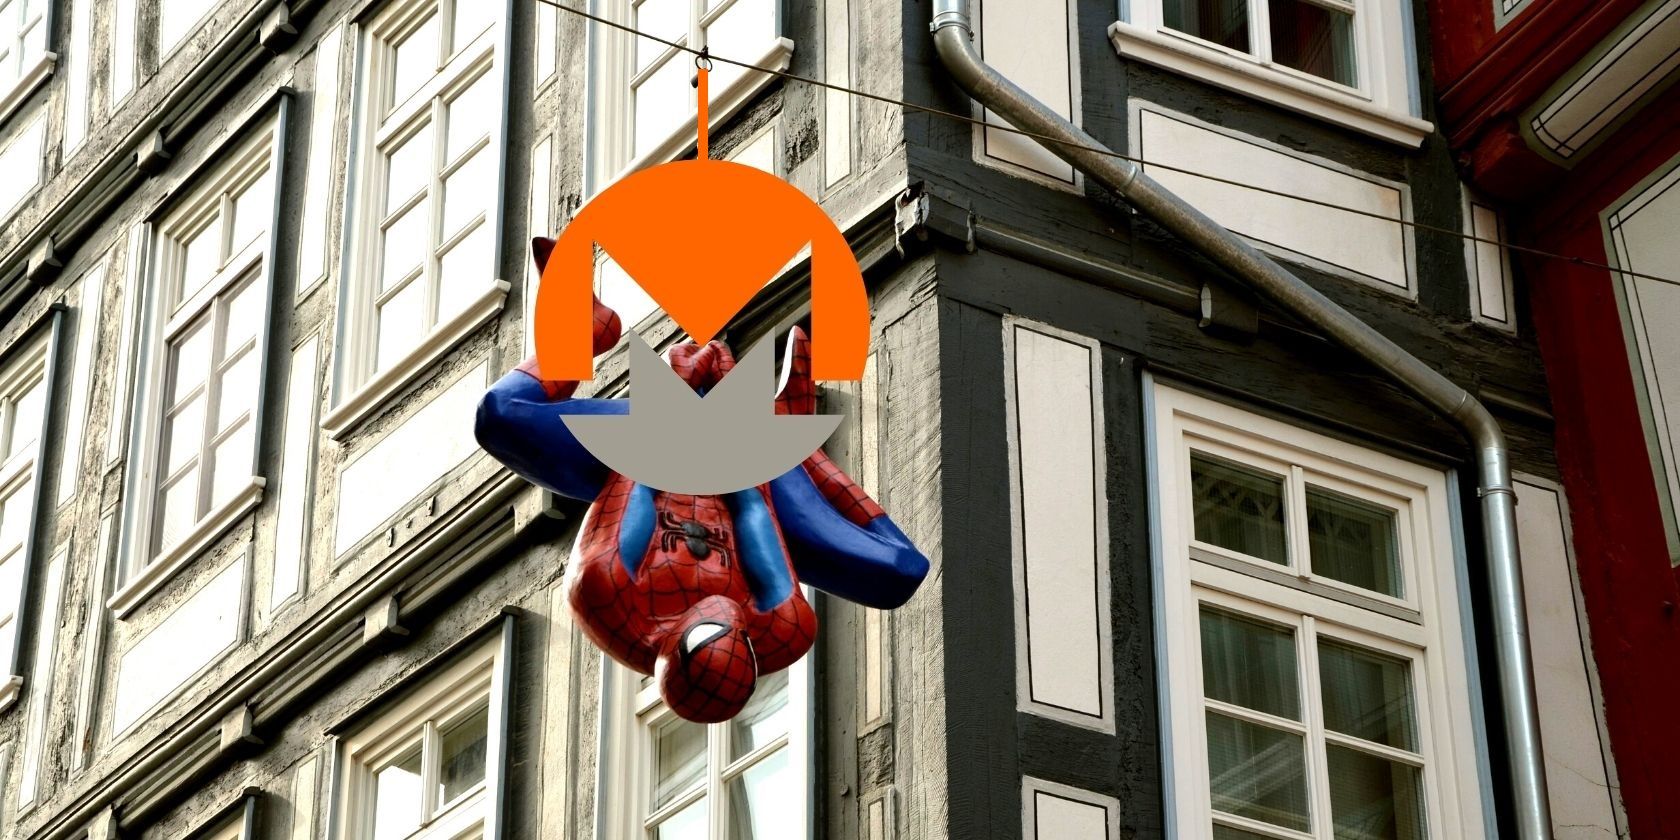 Monero coin juxtaposed against an image of Spider-Man hanging upside down